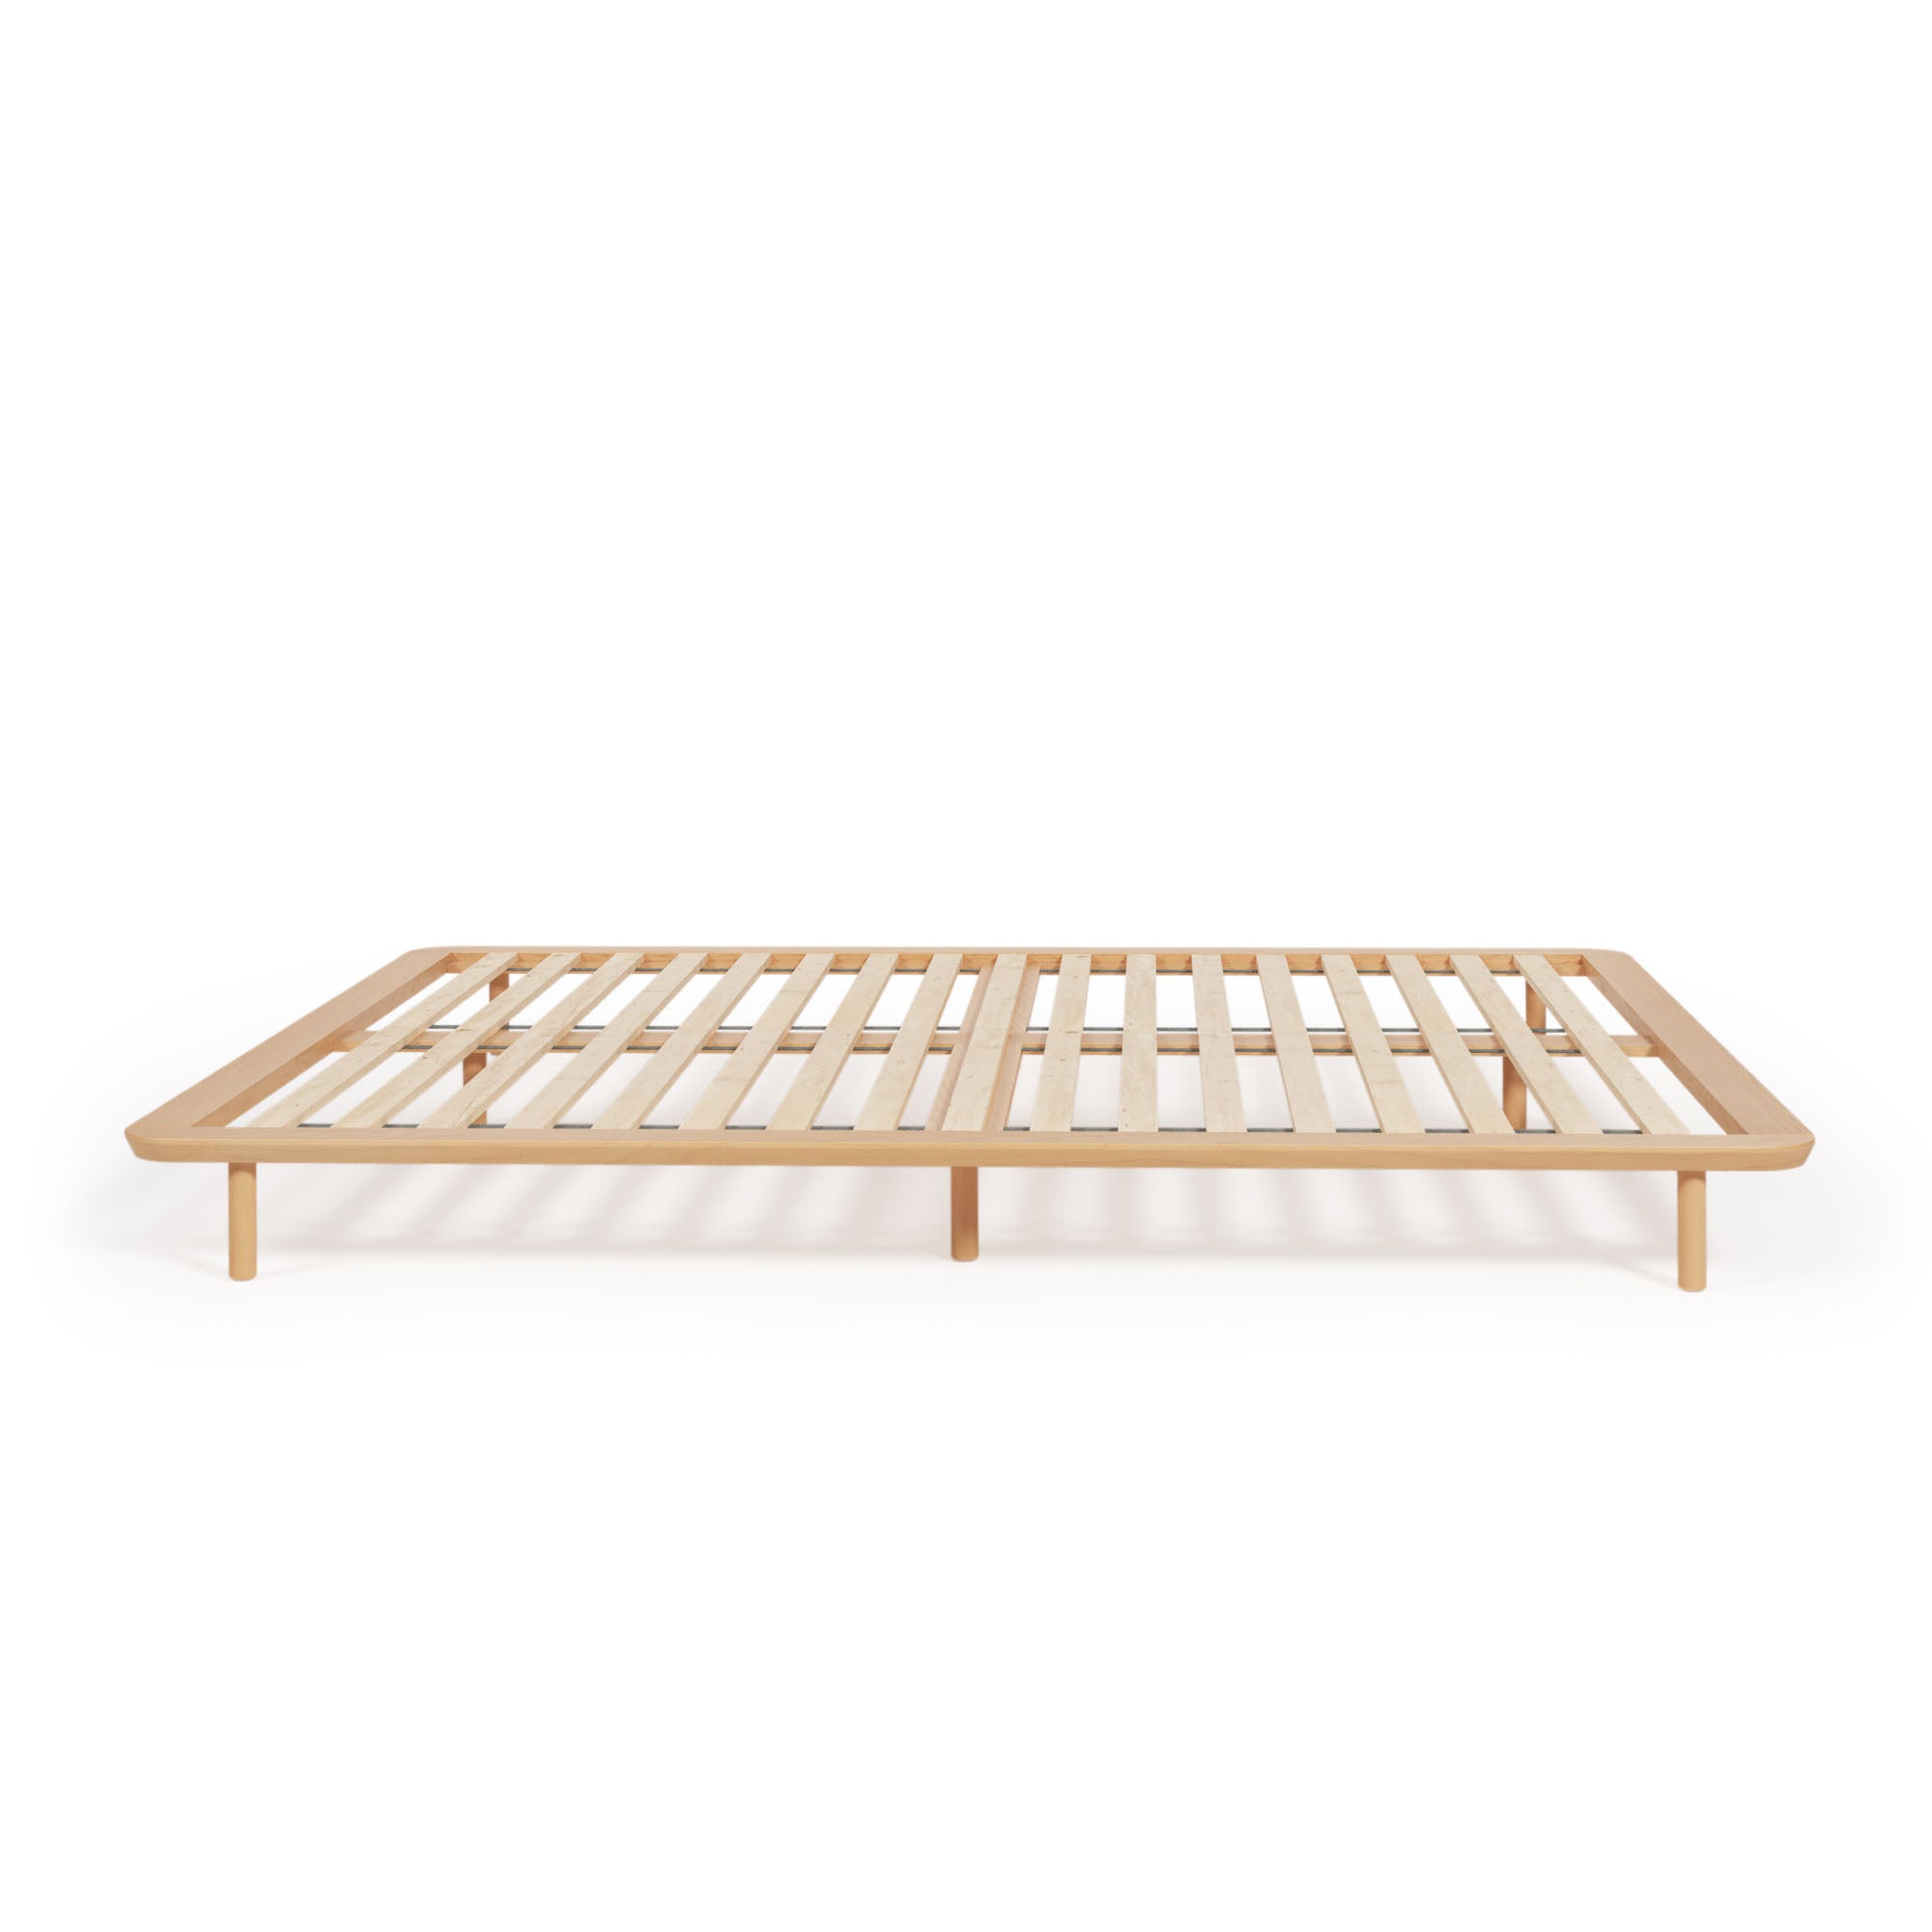 Anielle bed made from solid ash wood for a 180 x 200 cm mattress